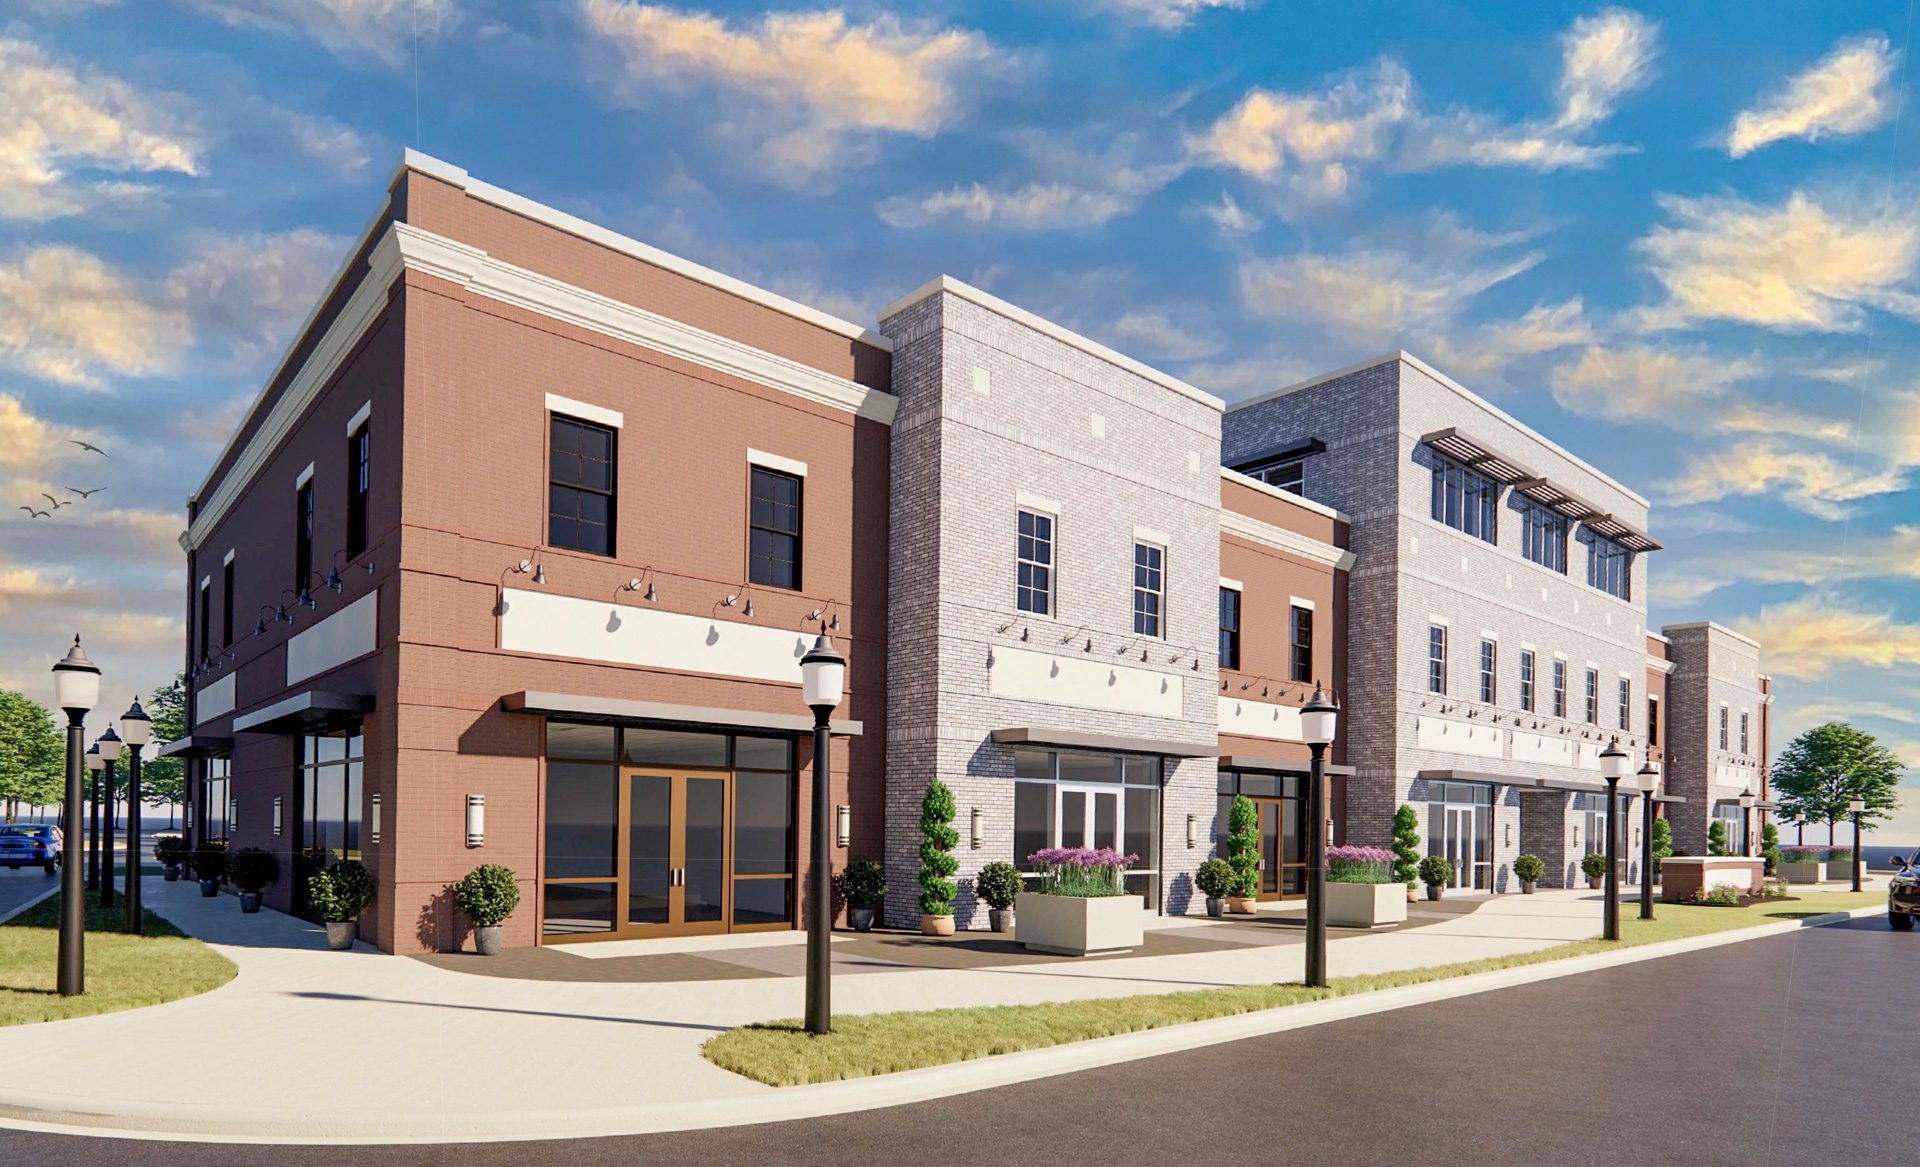 Mint Hill Mixed-Use rendering angle from ground two story red brick and concrete building